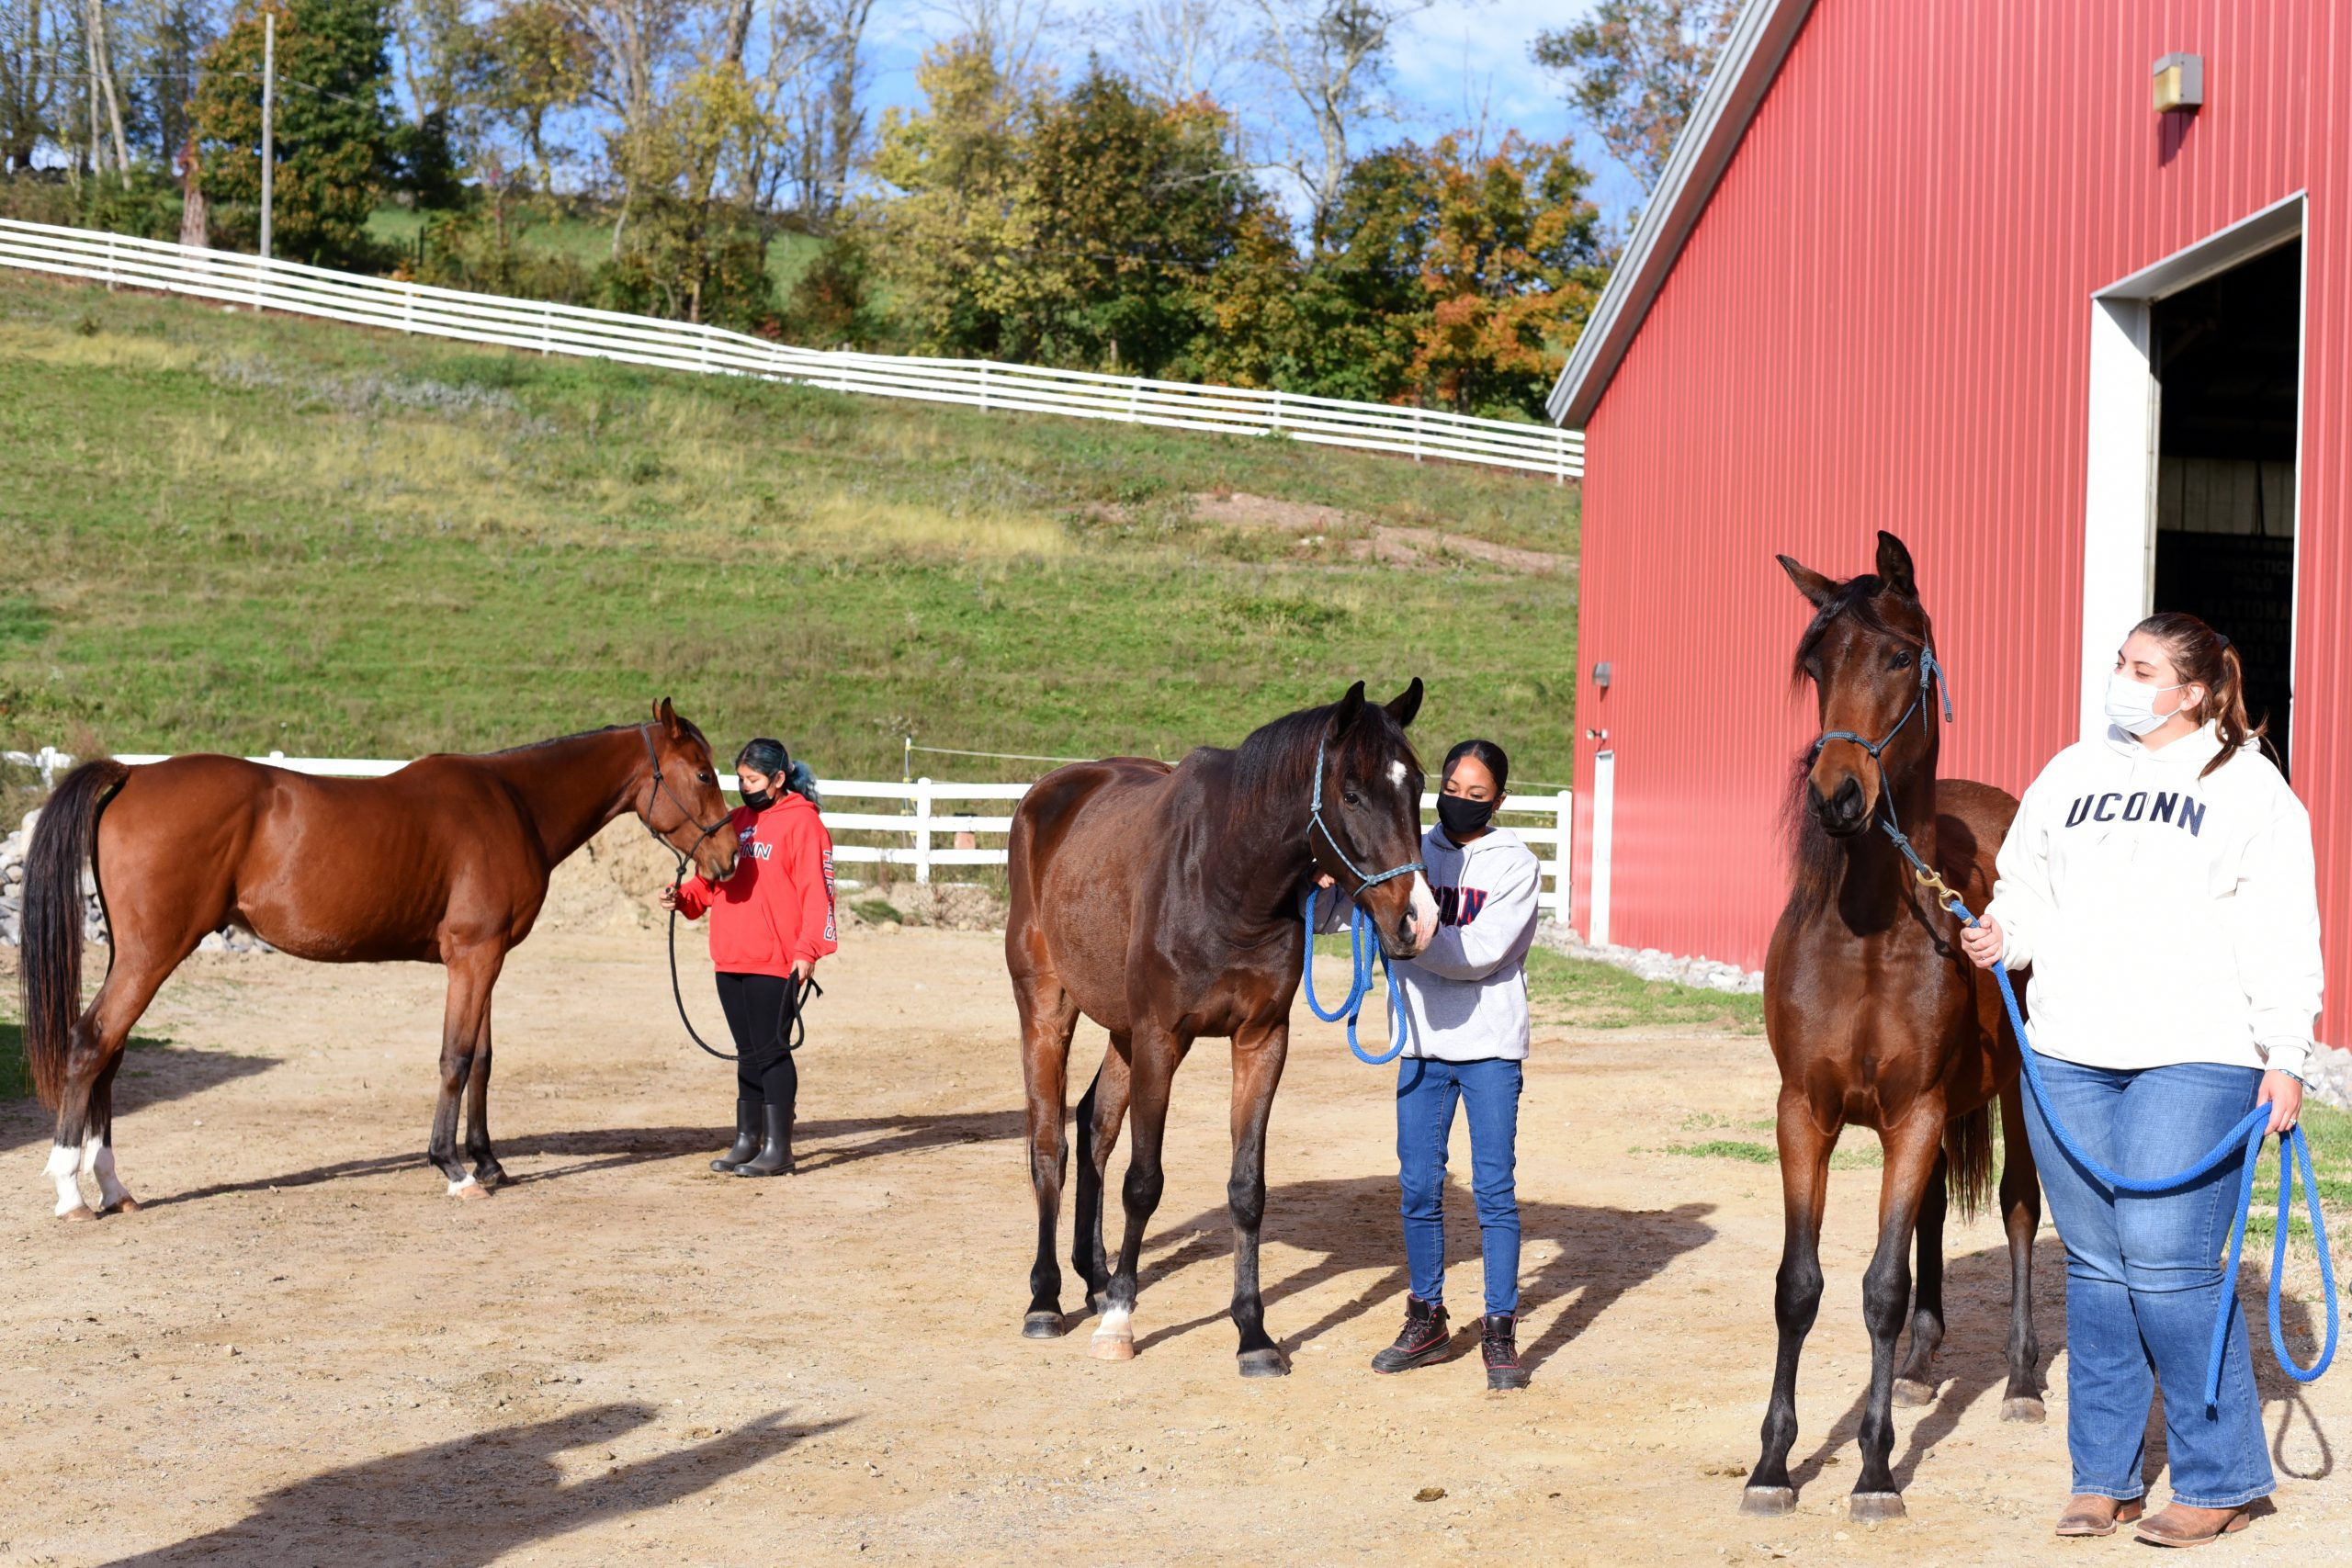 Students in the Department of Animal Science present horses at the 92nd Little International Livestock Show, known as the Little 'I,' in Horsebarn Hill Arena. Oct. 23, 2021. (Jason Sheldon/UConn Photo)